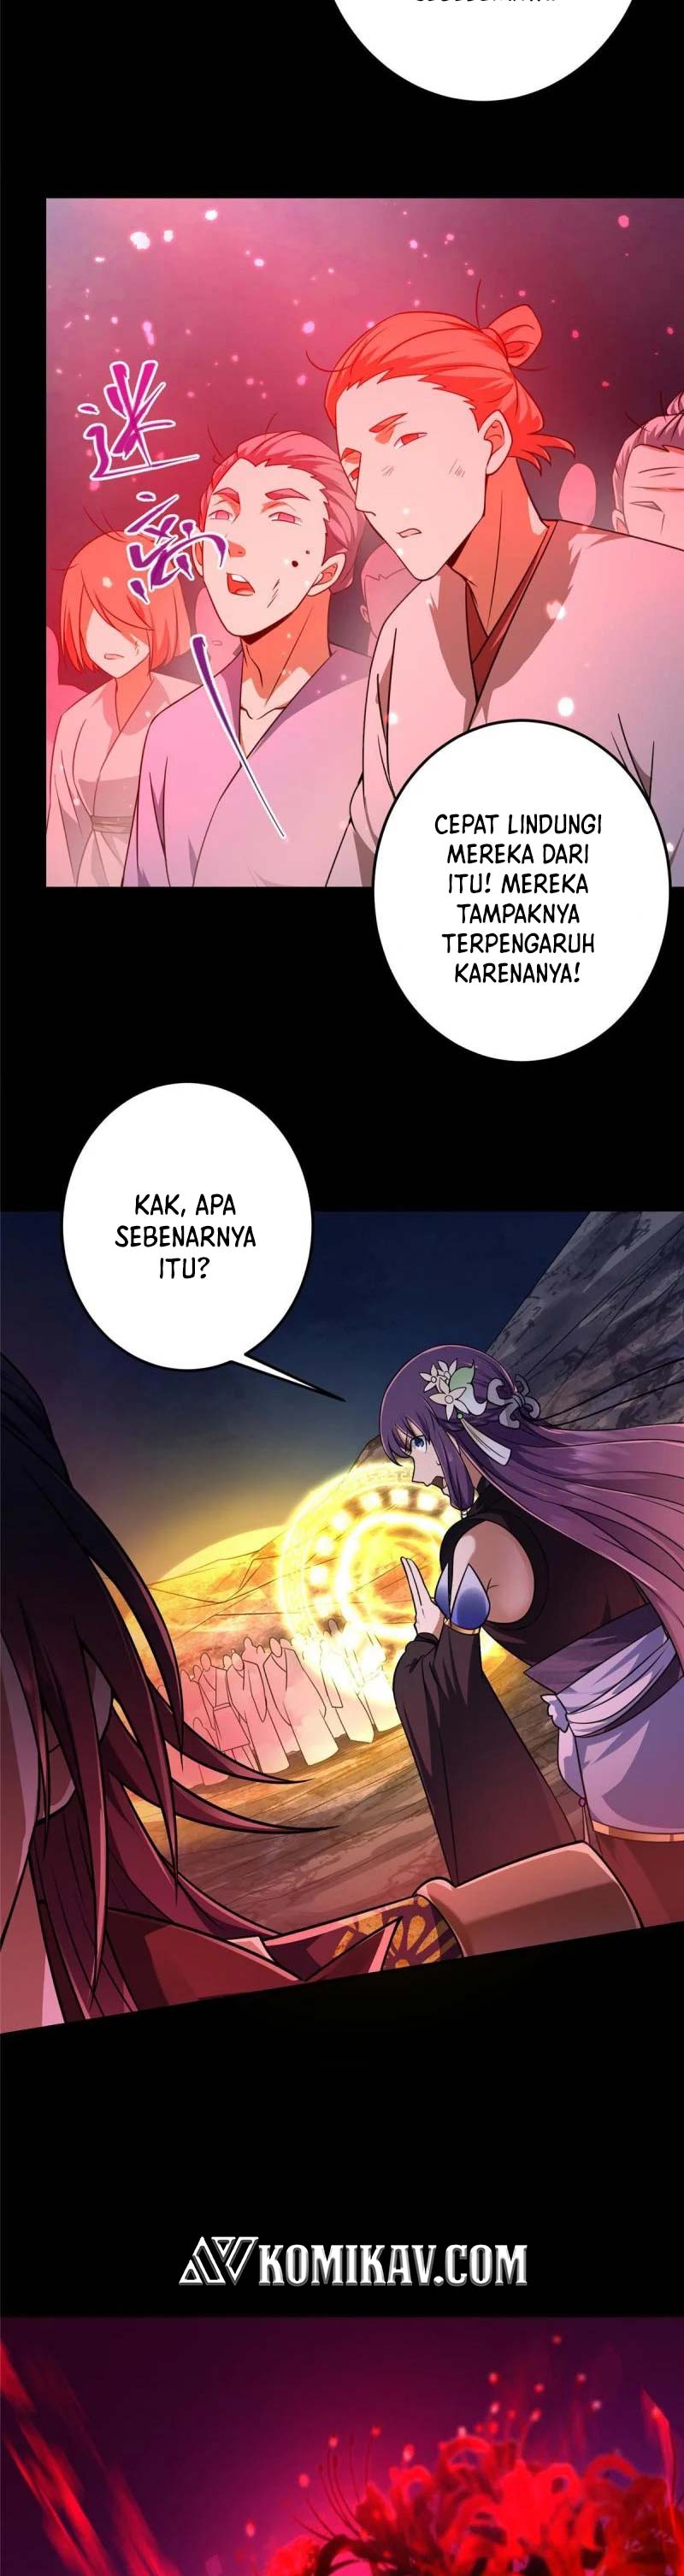 Keep A Low Profile, Sect Leader Chapter 160 Bahasa Indonesia